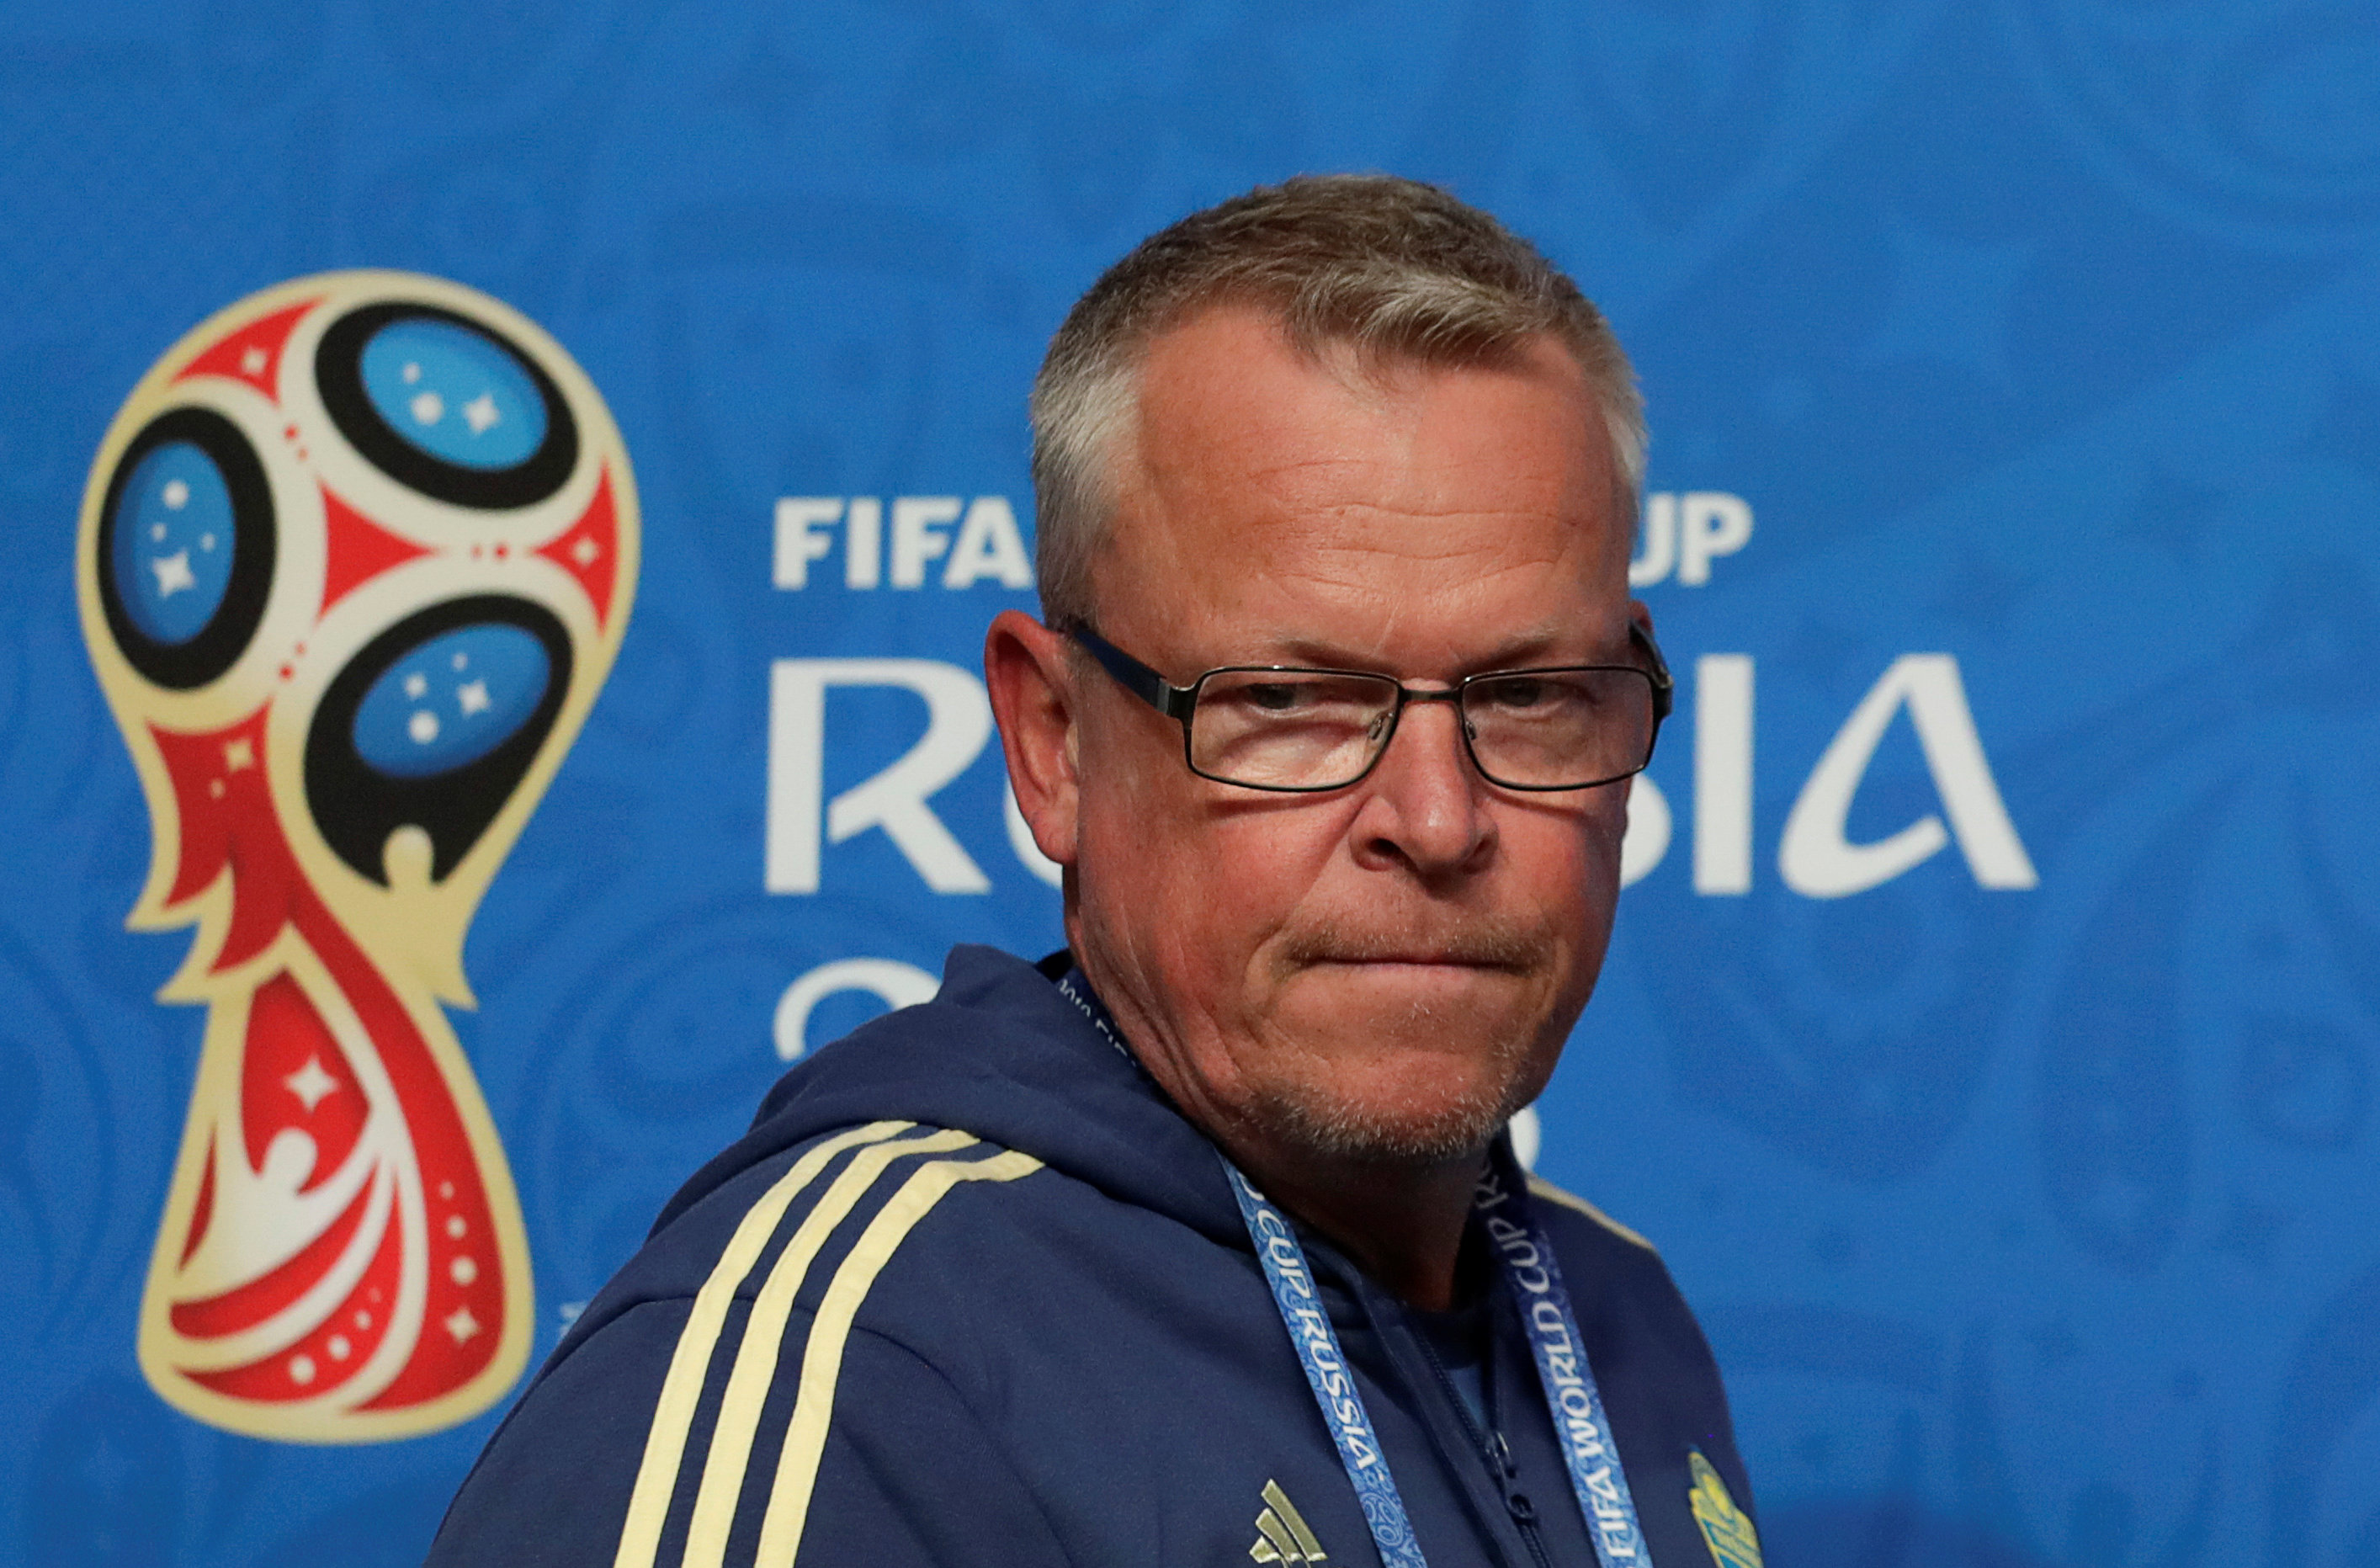 Football: Andersson leads Swedes back to promised World Cup land